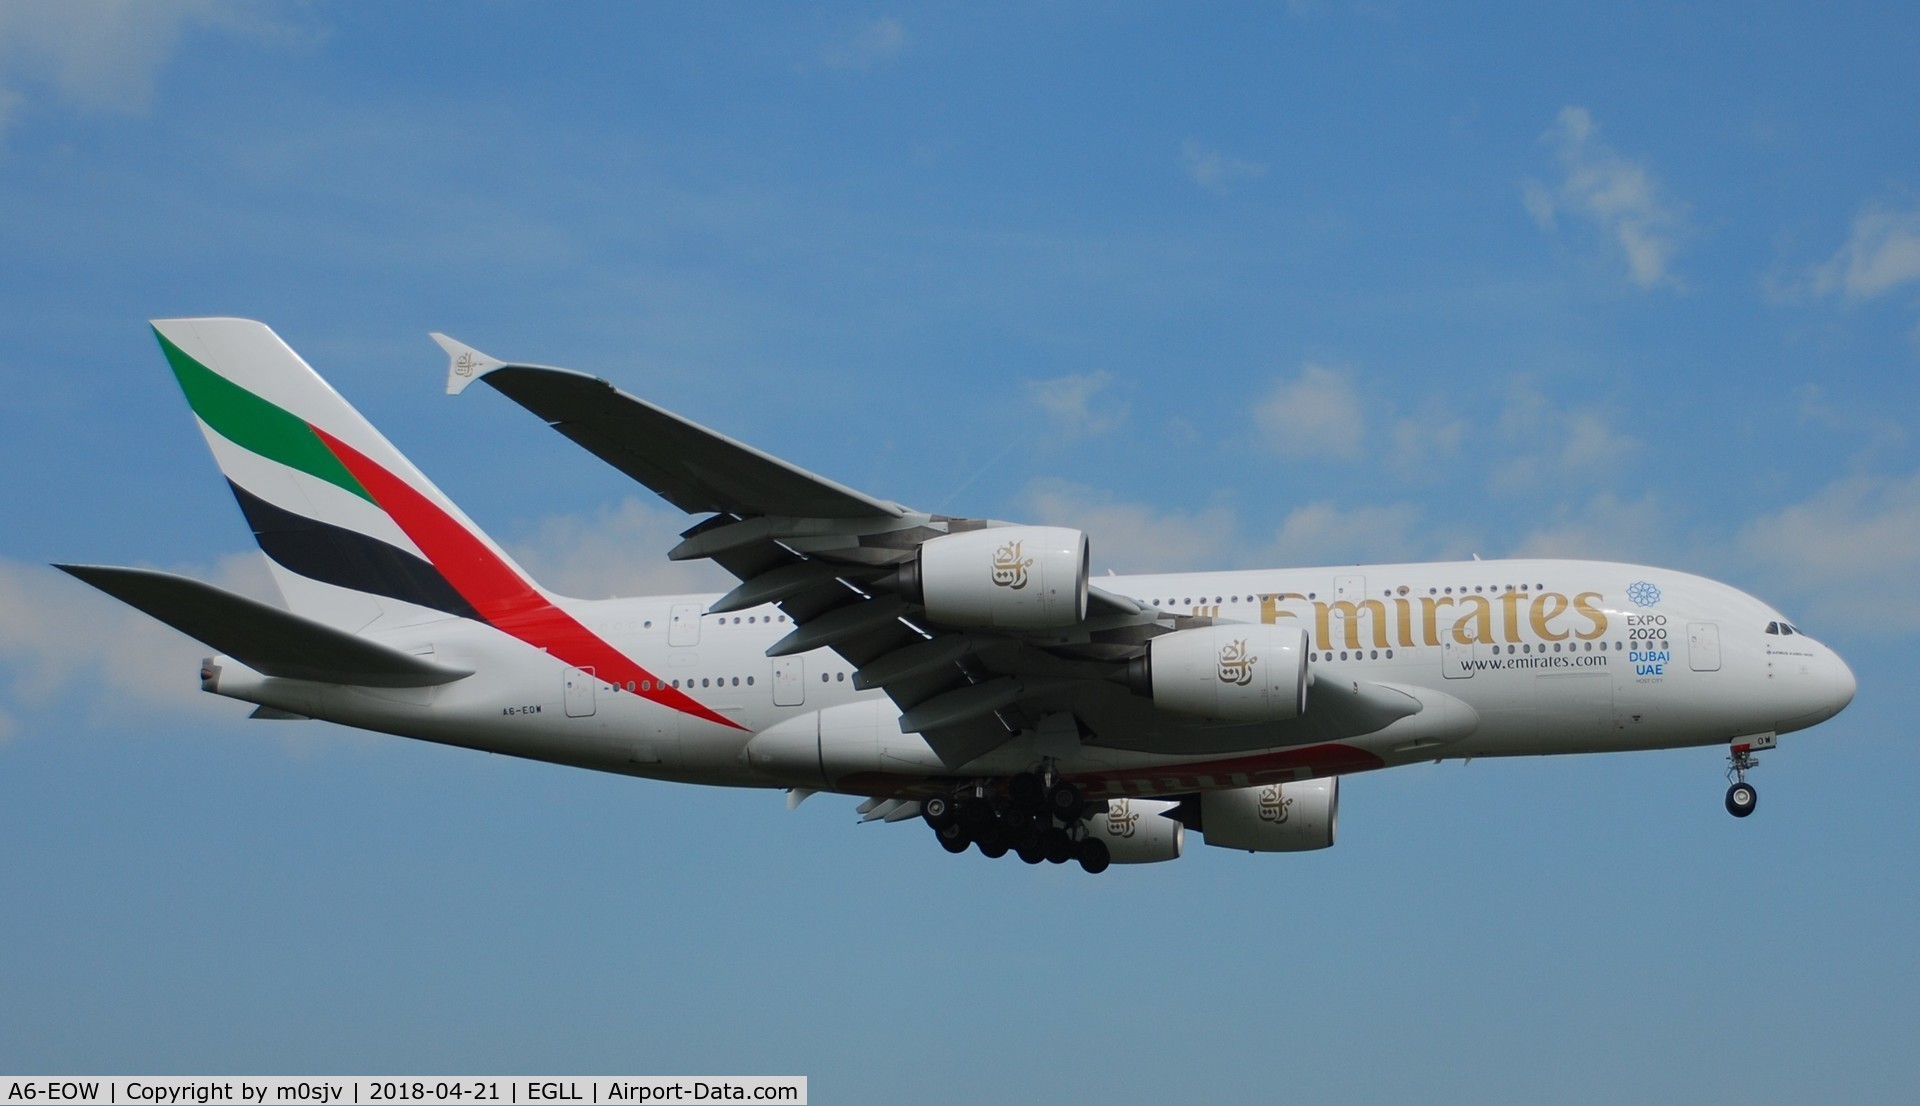 A6-EOW, 2015 Airbus A380-861 C/N 207, Taken from the threshold of 29L